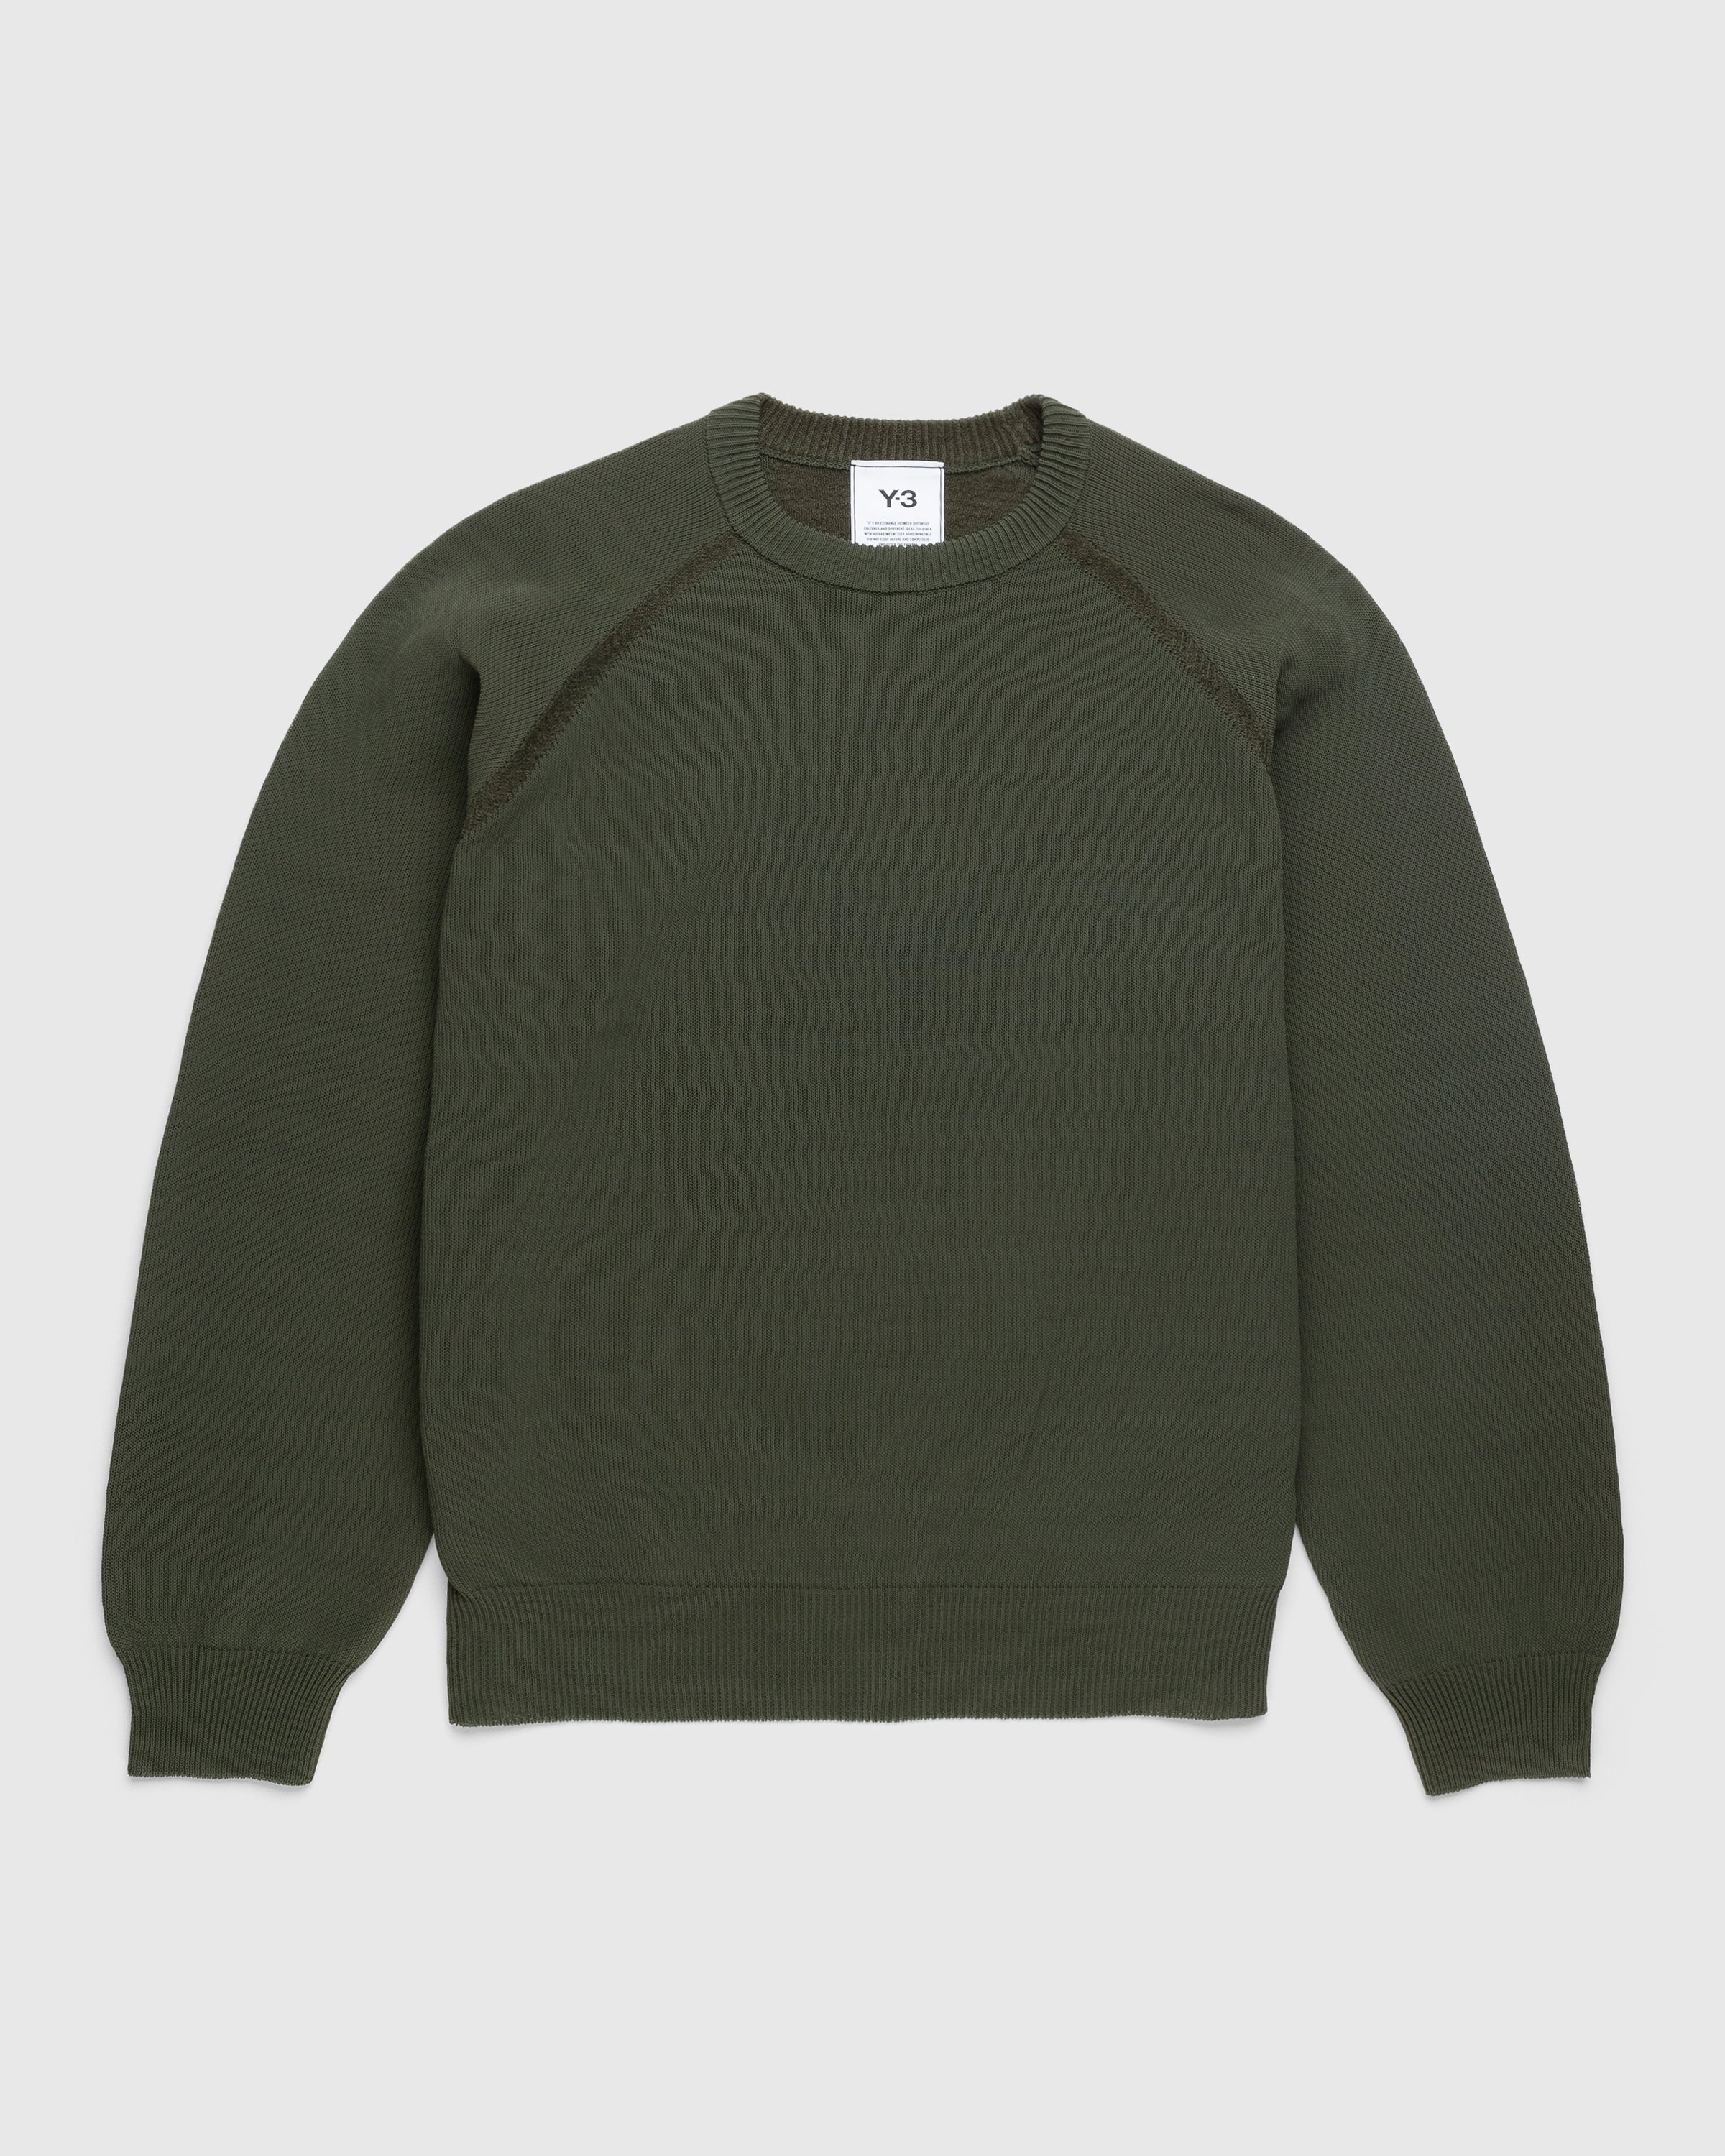 Y-3 – CL Knitted CR Sweater - Knitwear - Green - Image 1